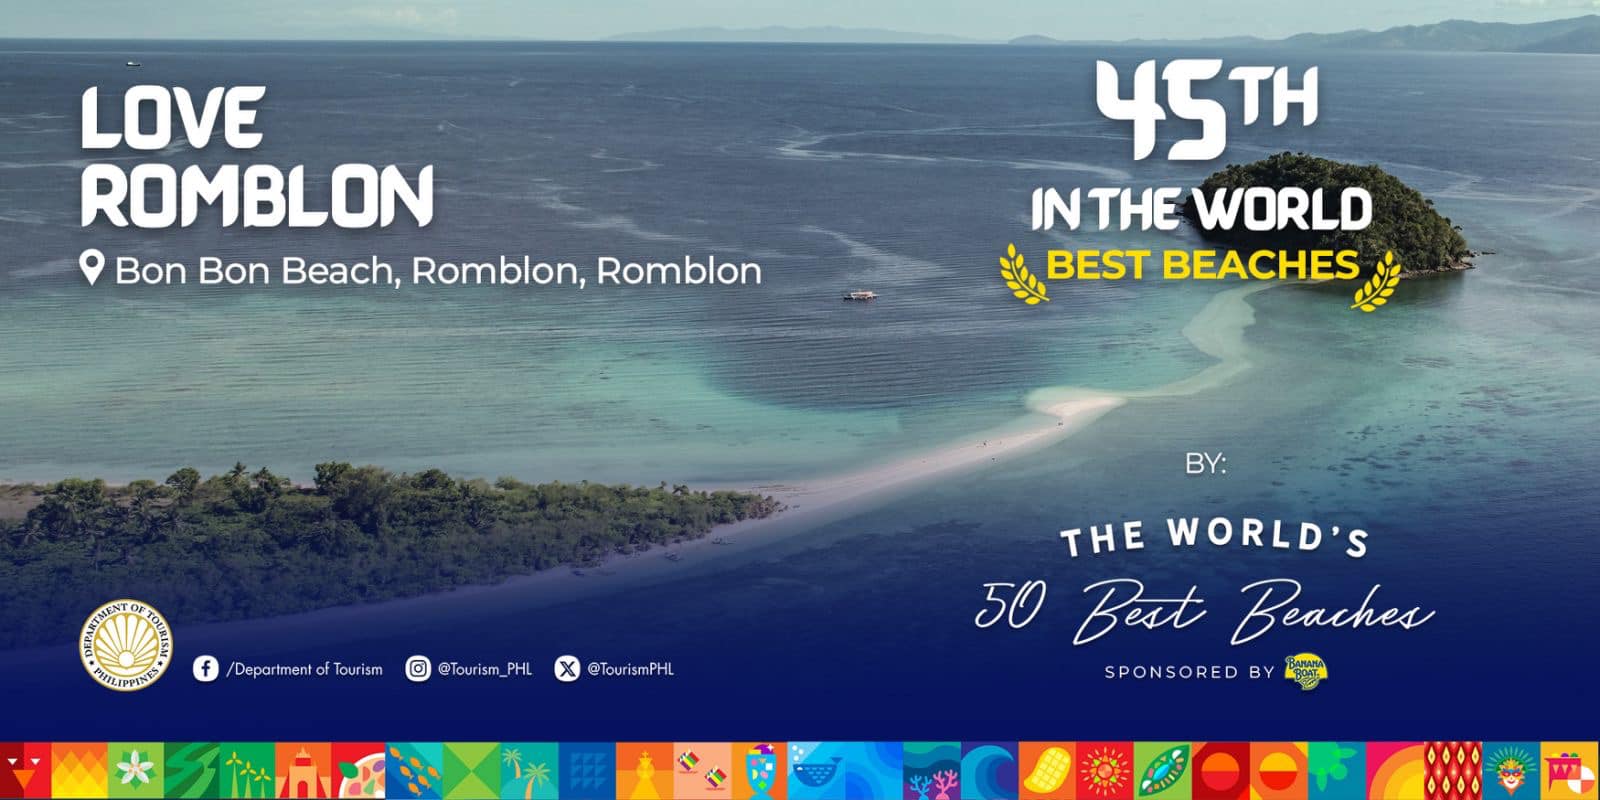 two ph beaches voted among 50 best in the world